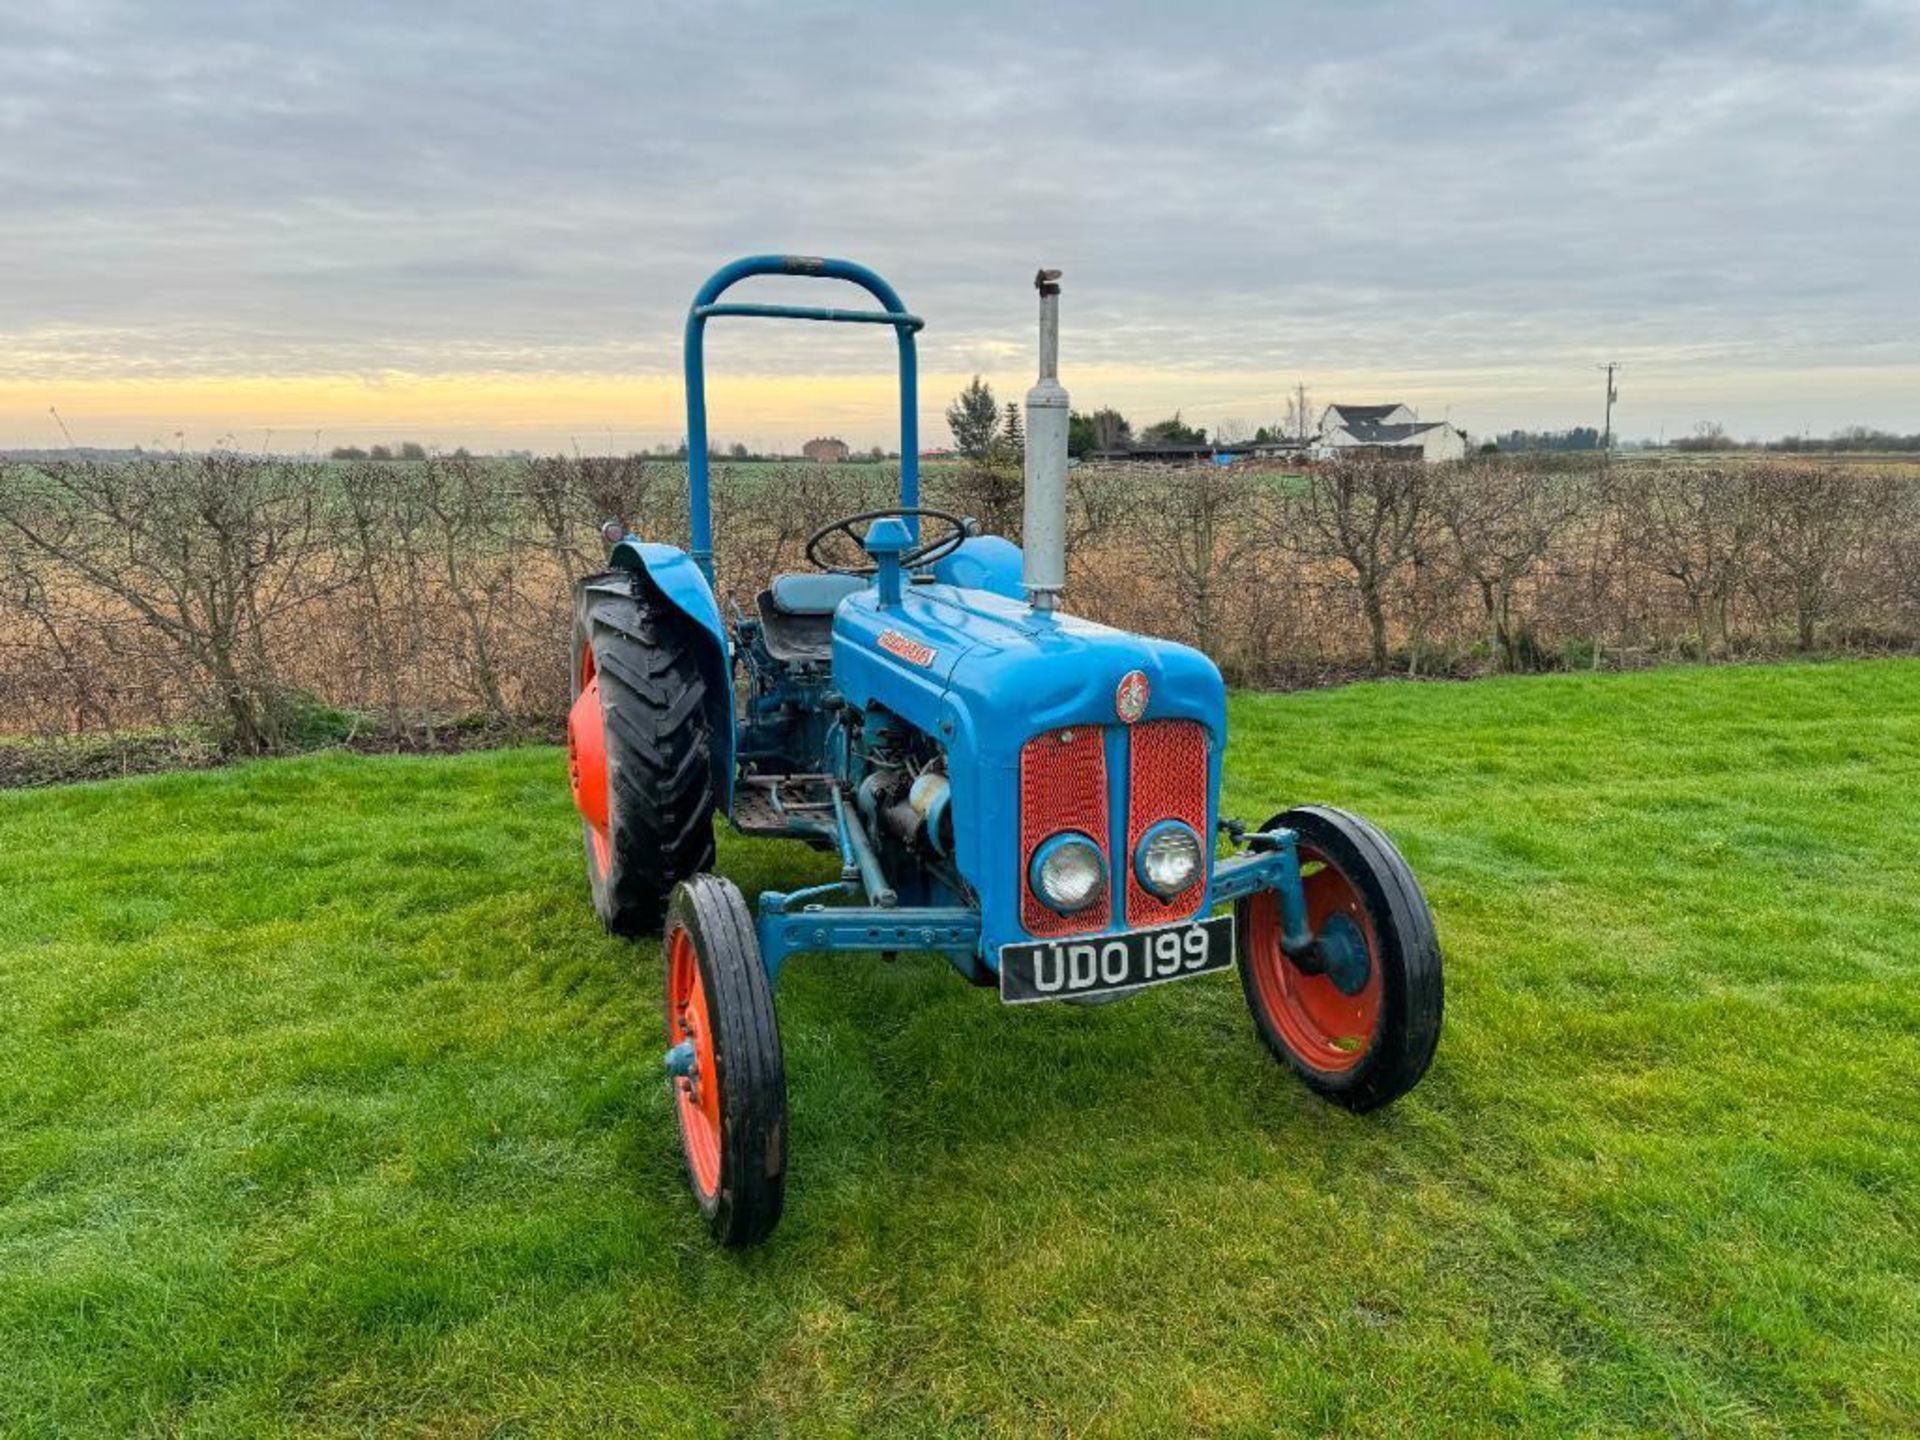 1962 Fordson Dexta 2wd diesel tractor with pick up hitch, rear linkage and rollbar on 12.4/11-28 rea - Image 9 of 14